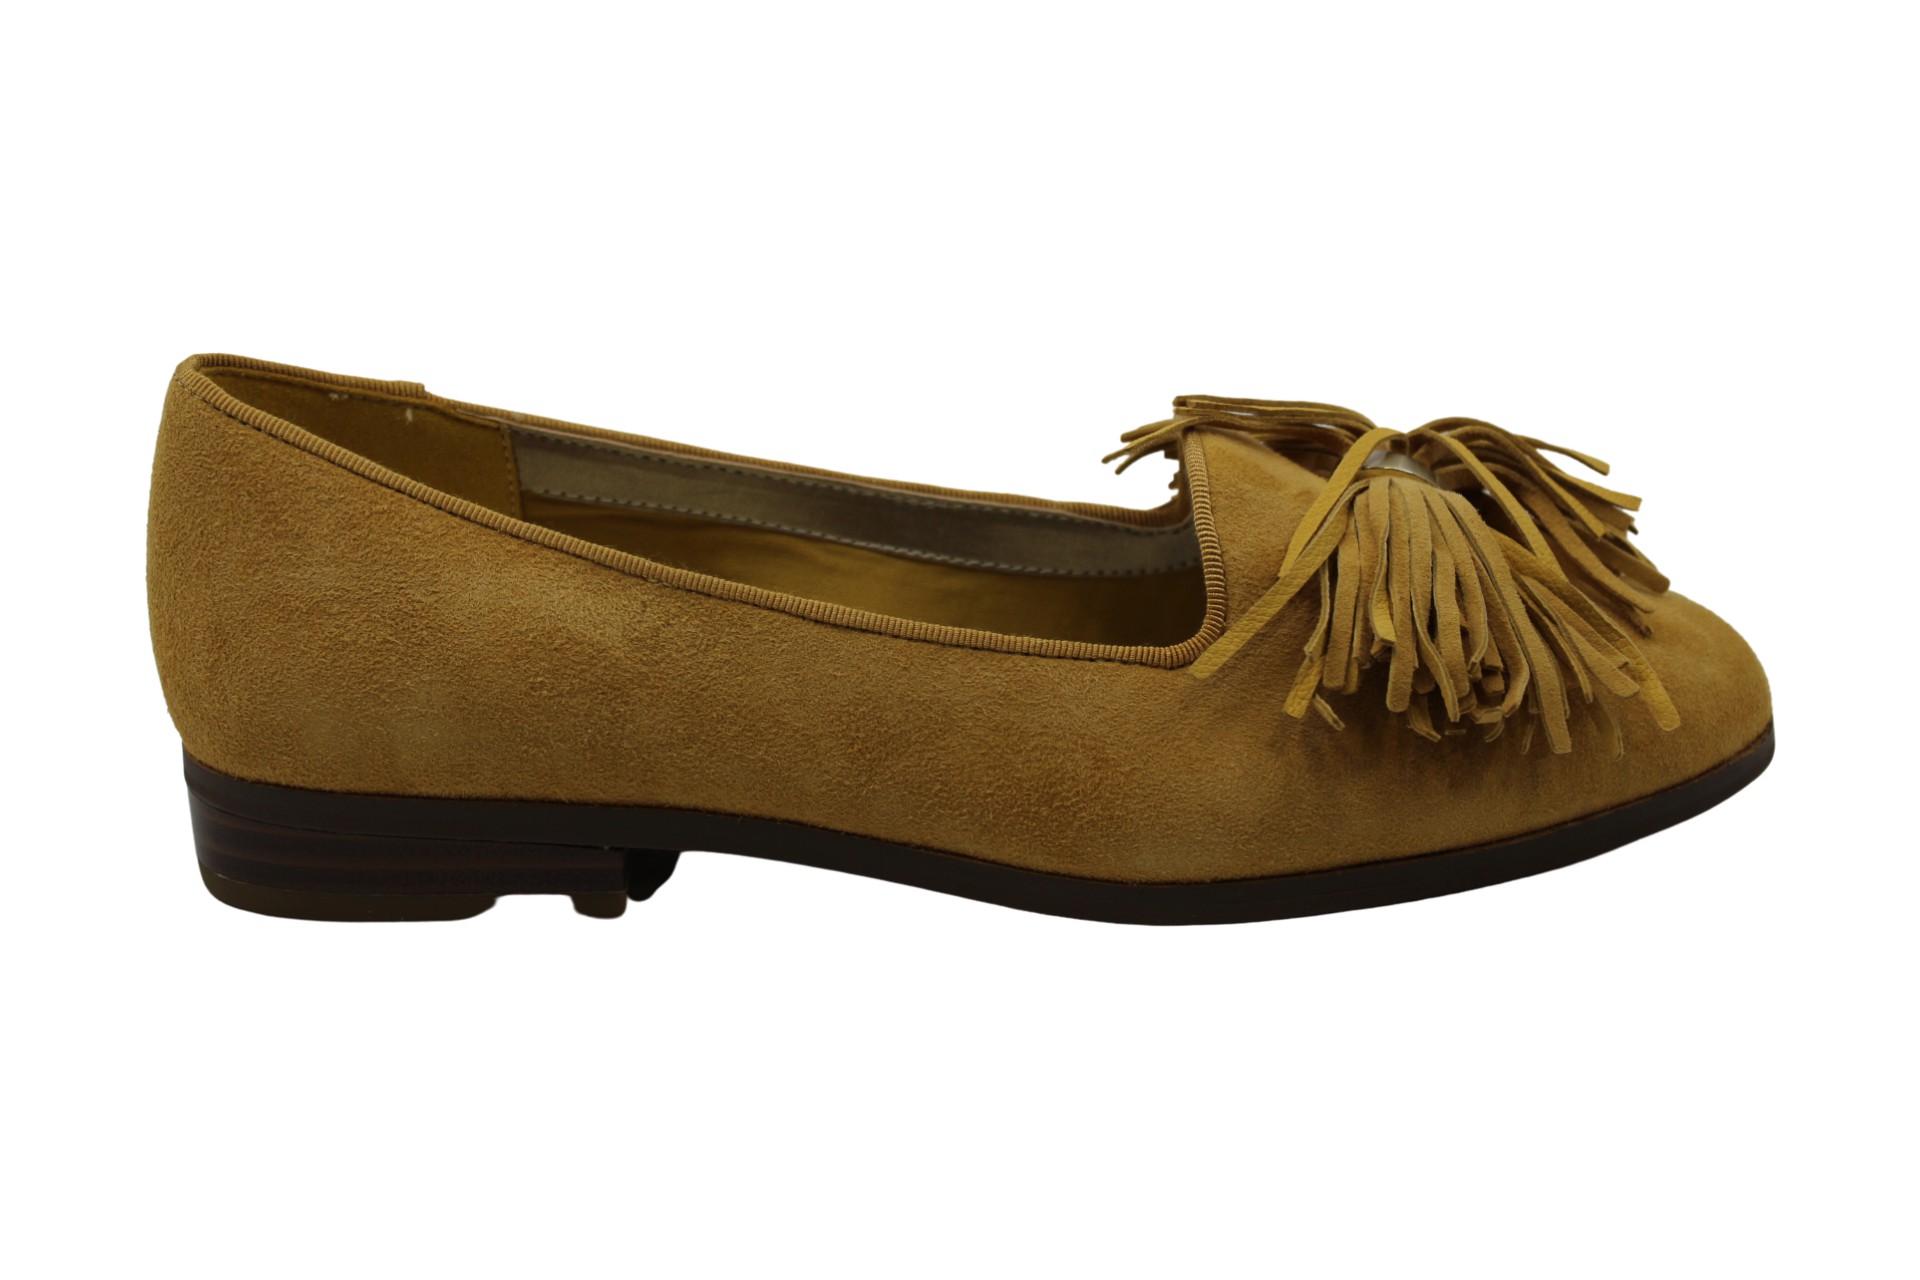 ANNE KLEIN WOMENS Dixie Fabric Closed Toe Loafers, Buttercup, Size 8.5 ...